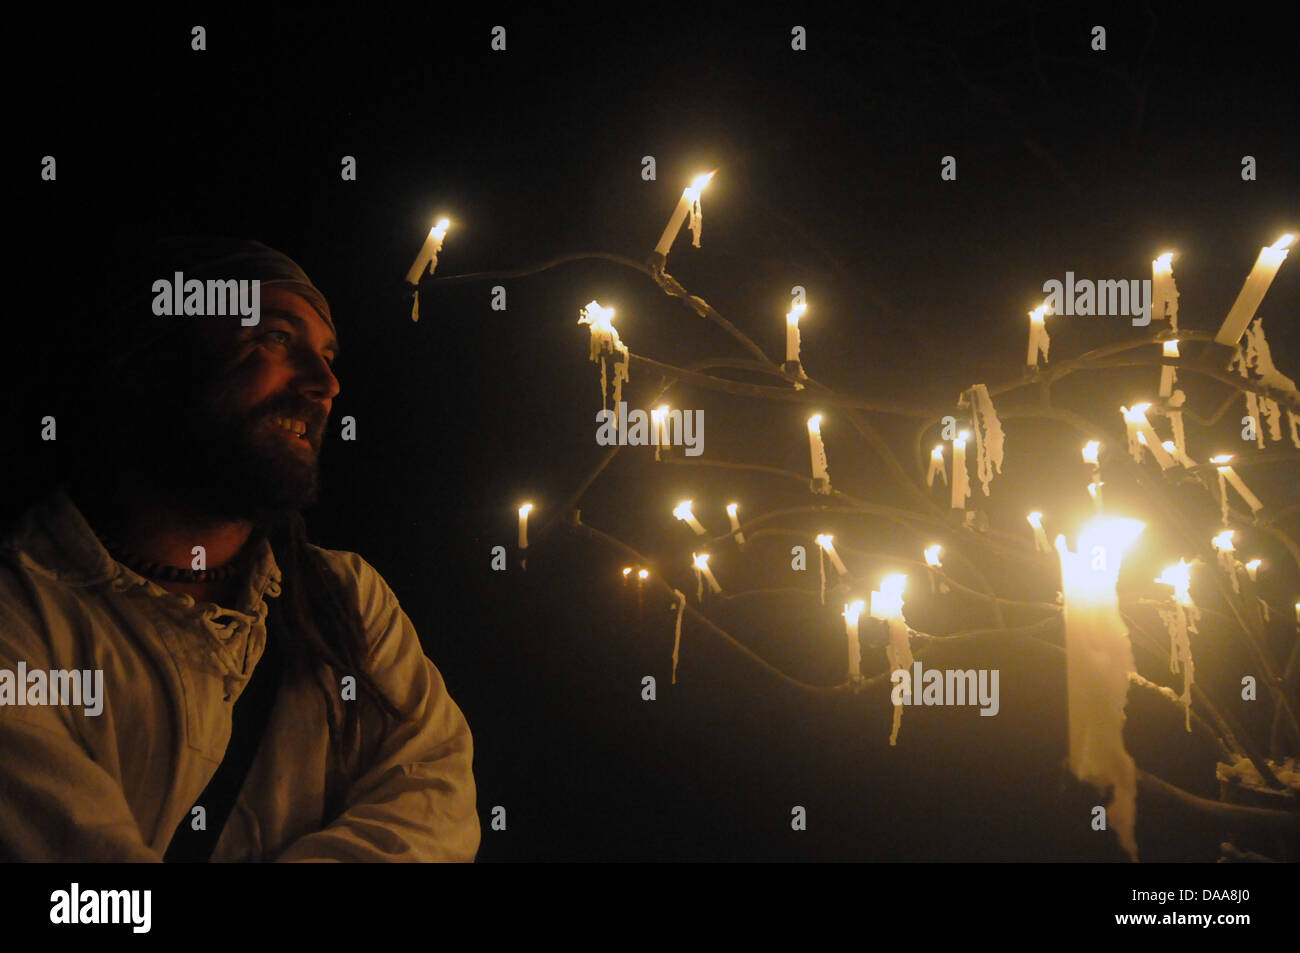 Man with many candles dripping wax in darkened mysterious candelabra Stock Photo